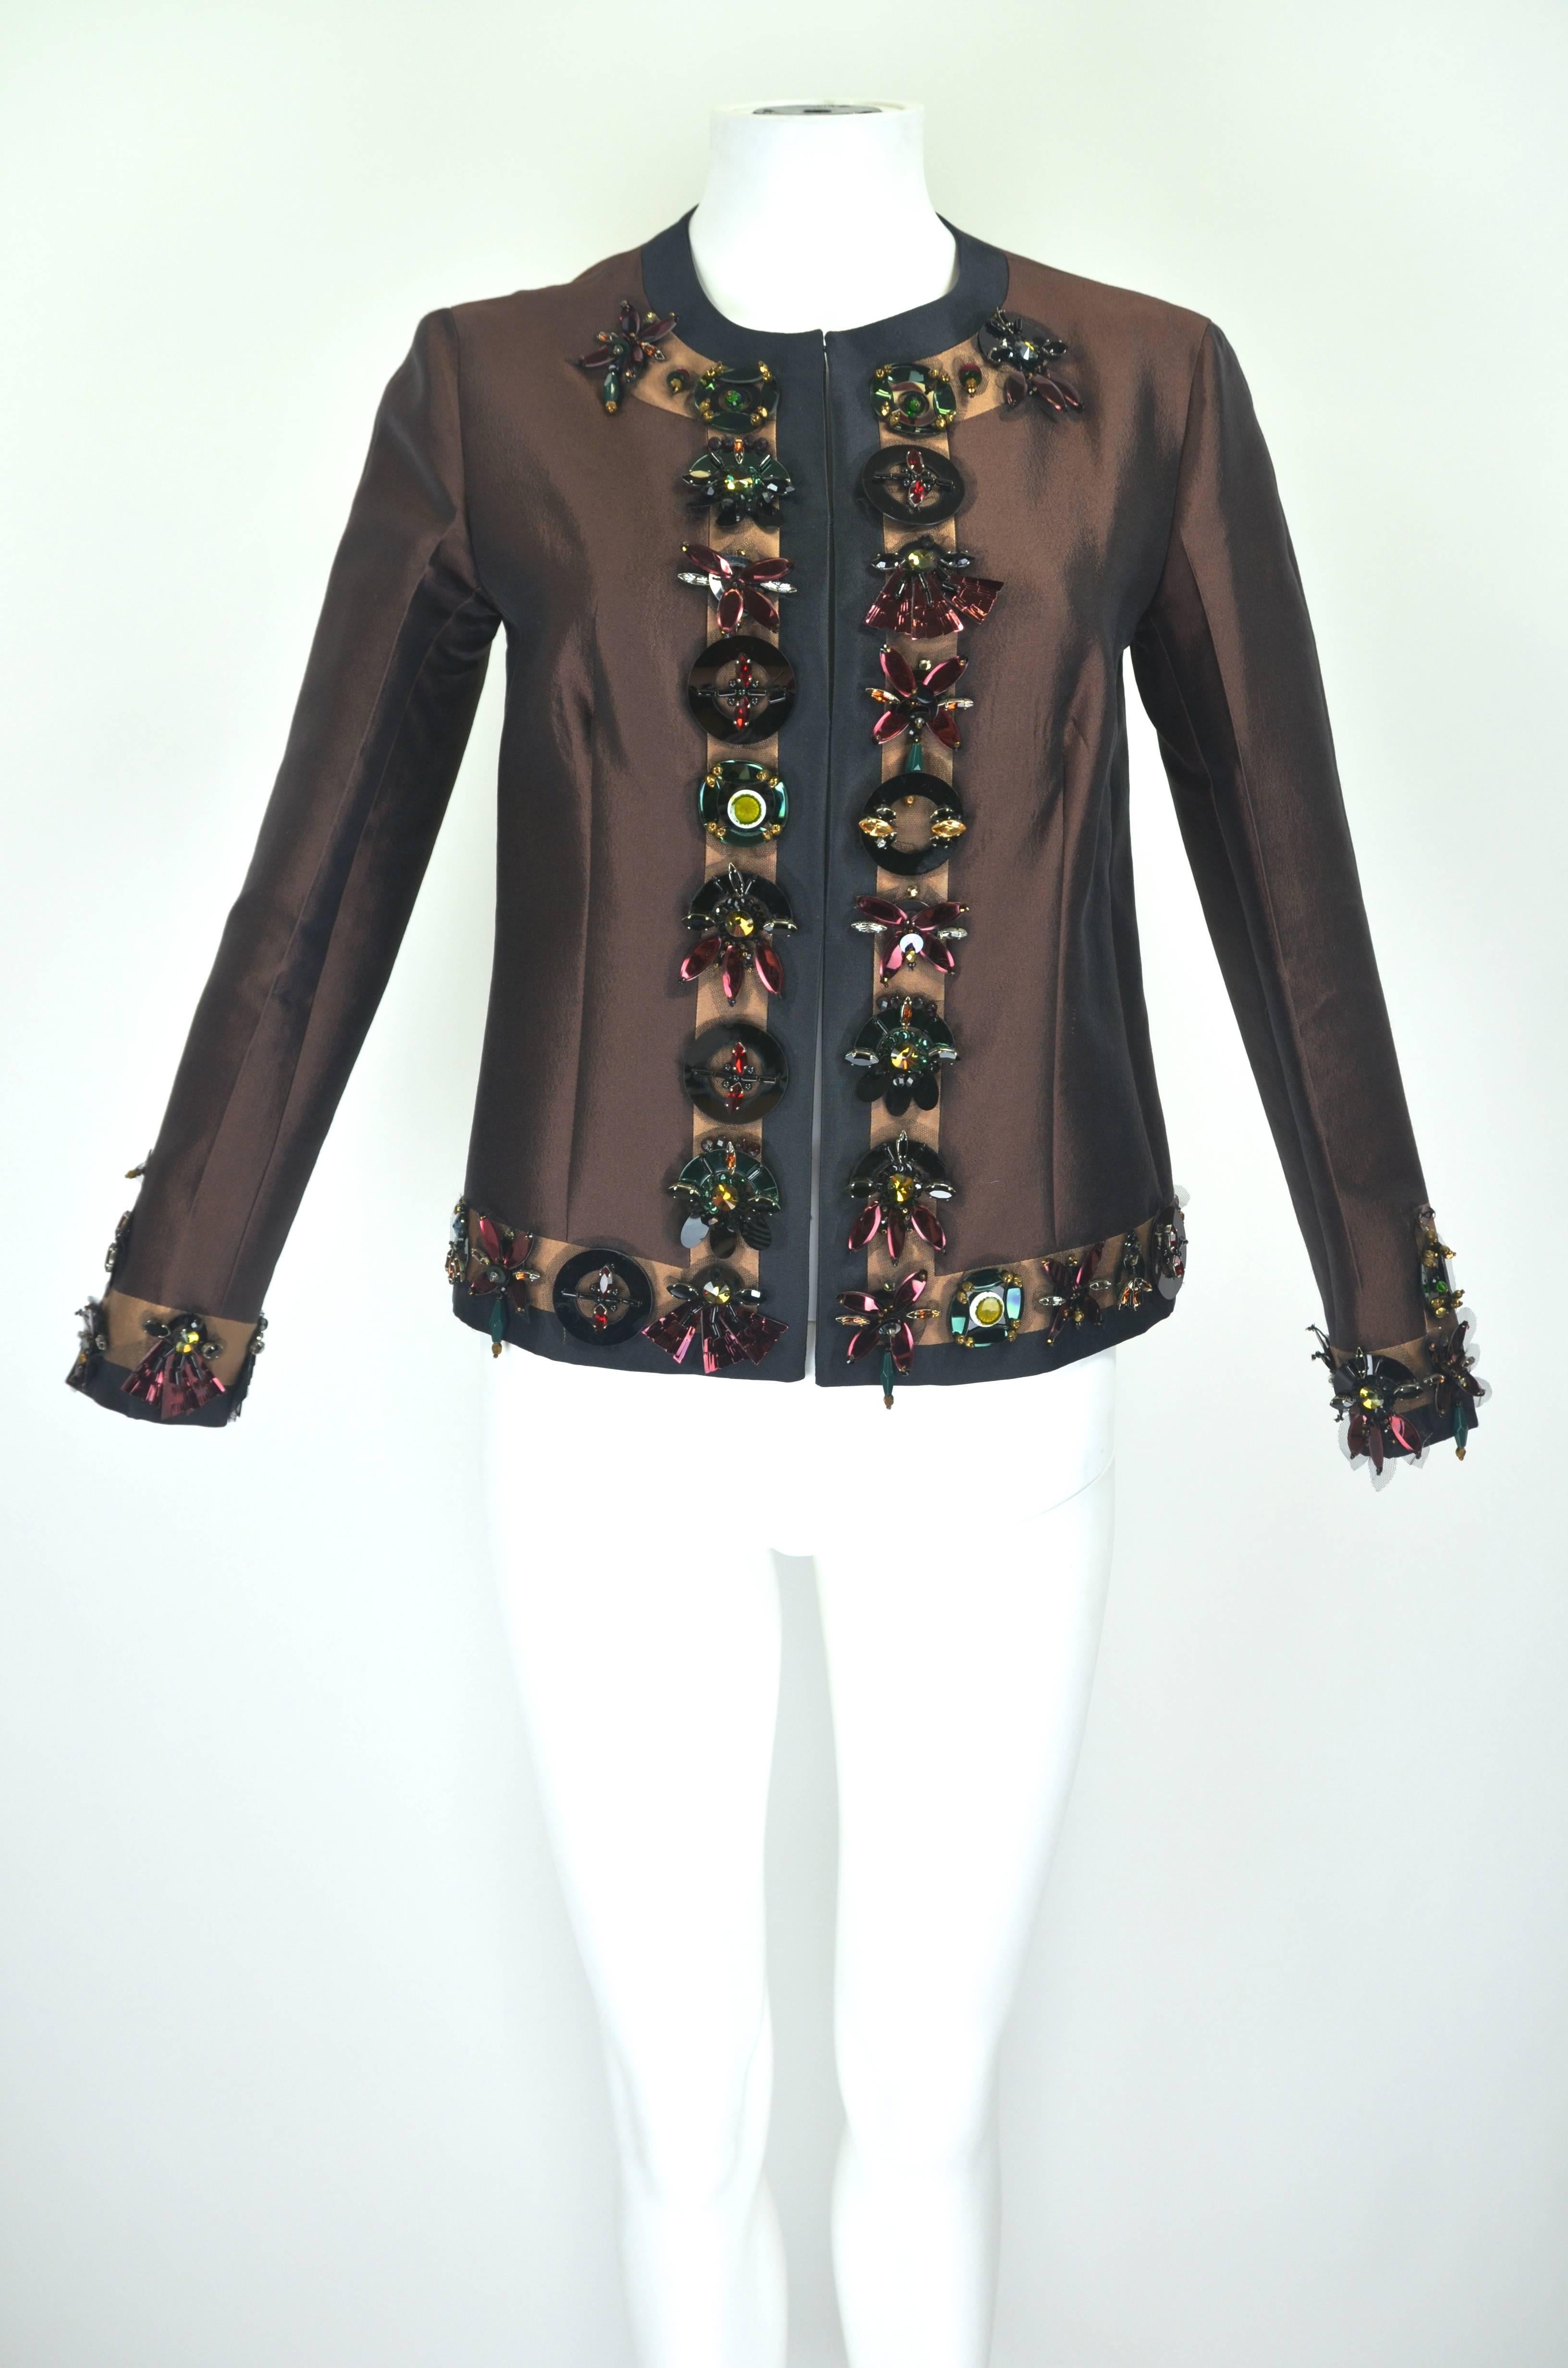 This gorgeous deep brown silk wool jacket from Prada features jeweltone oversize paillettes and rhinestones, adding texture to the graphic color palette. 

Measurements--
Bust: 34 inches
Sleeve Length: 21 inches
Length, Center Back to Hem: 21